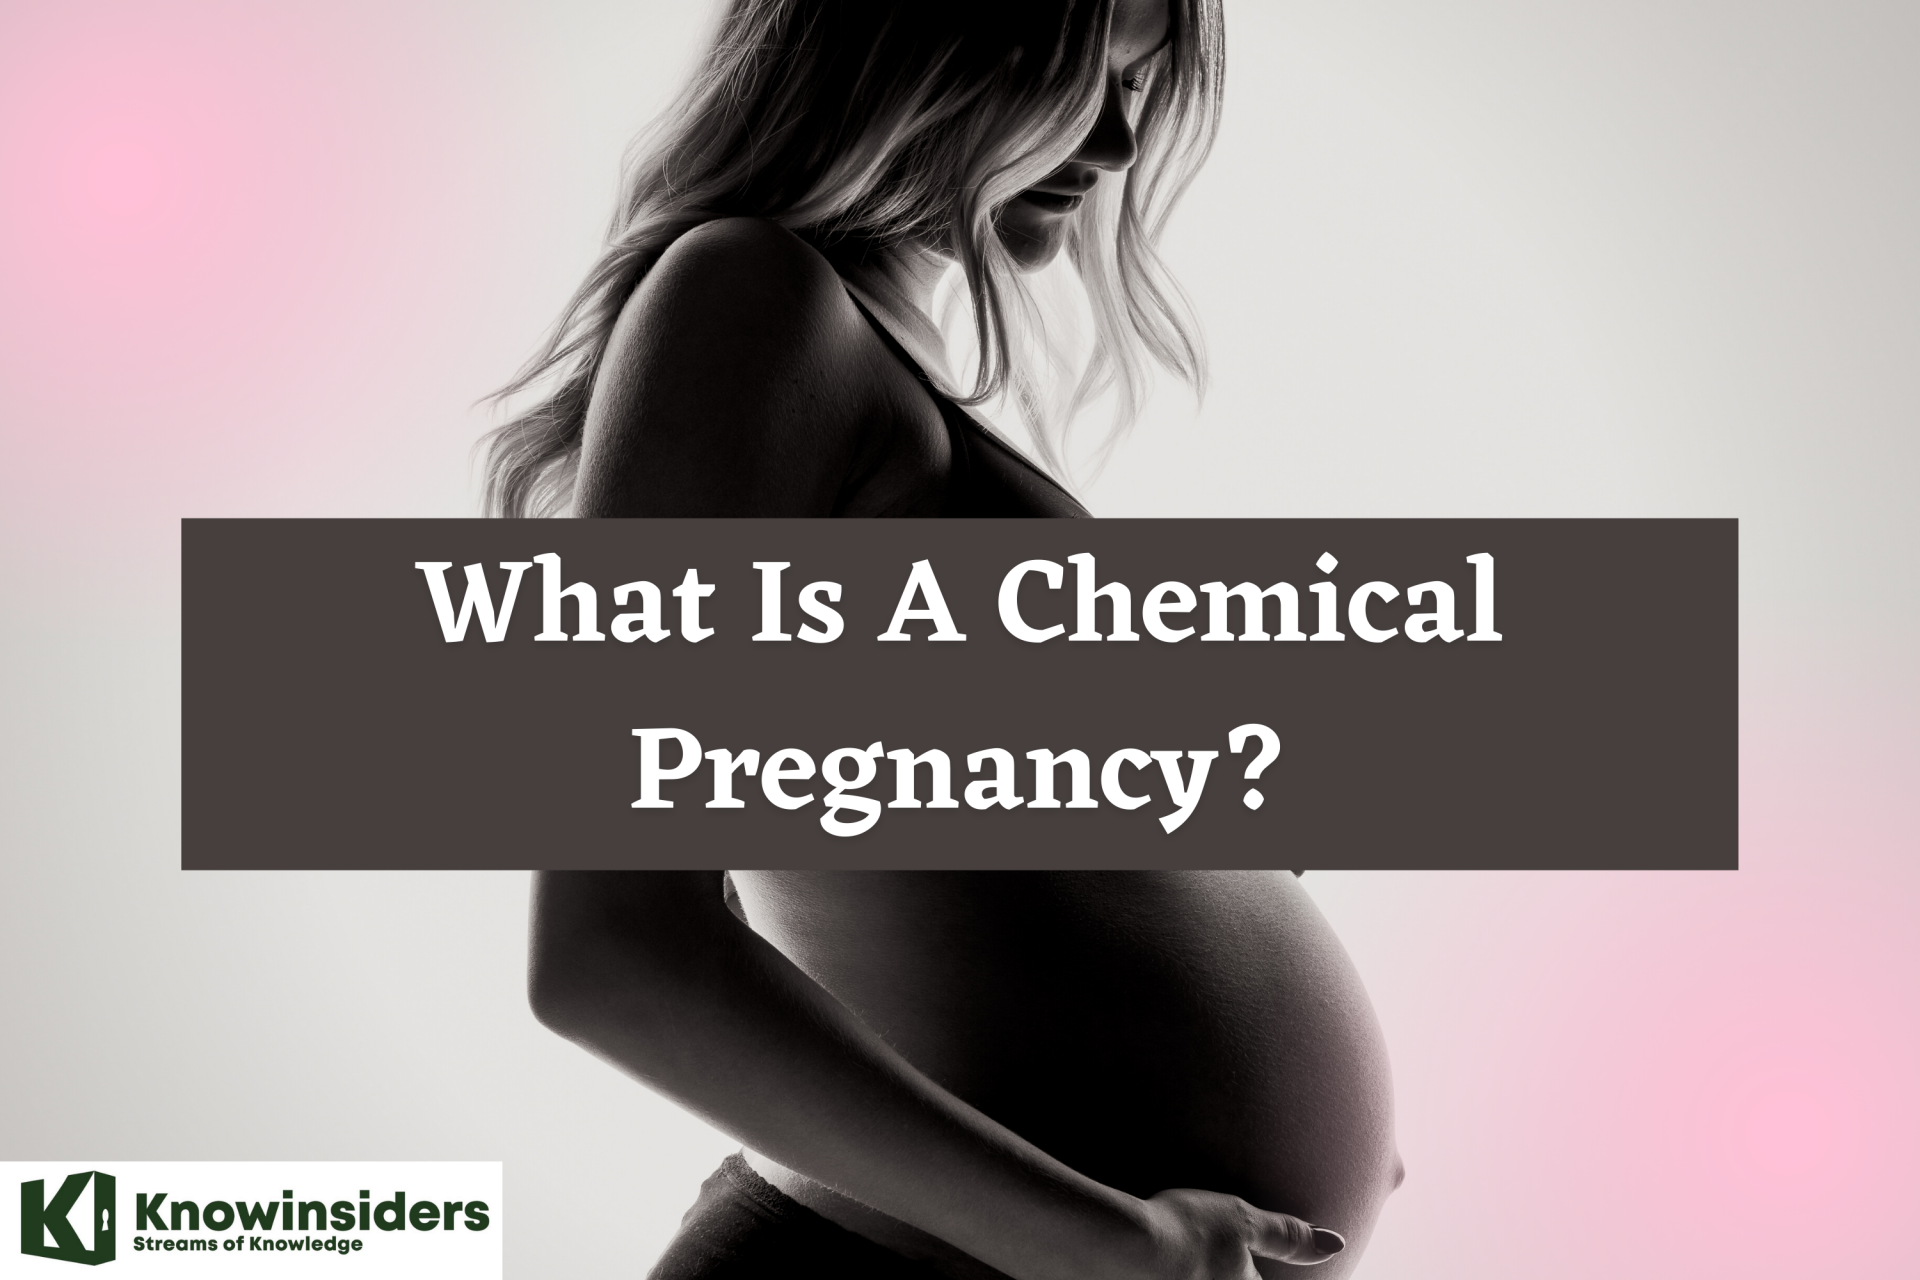 What Is A Chemical Pregnancy - Symptoms, Causes And More